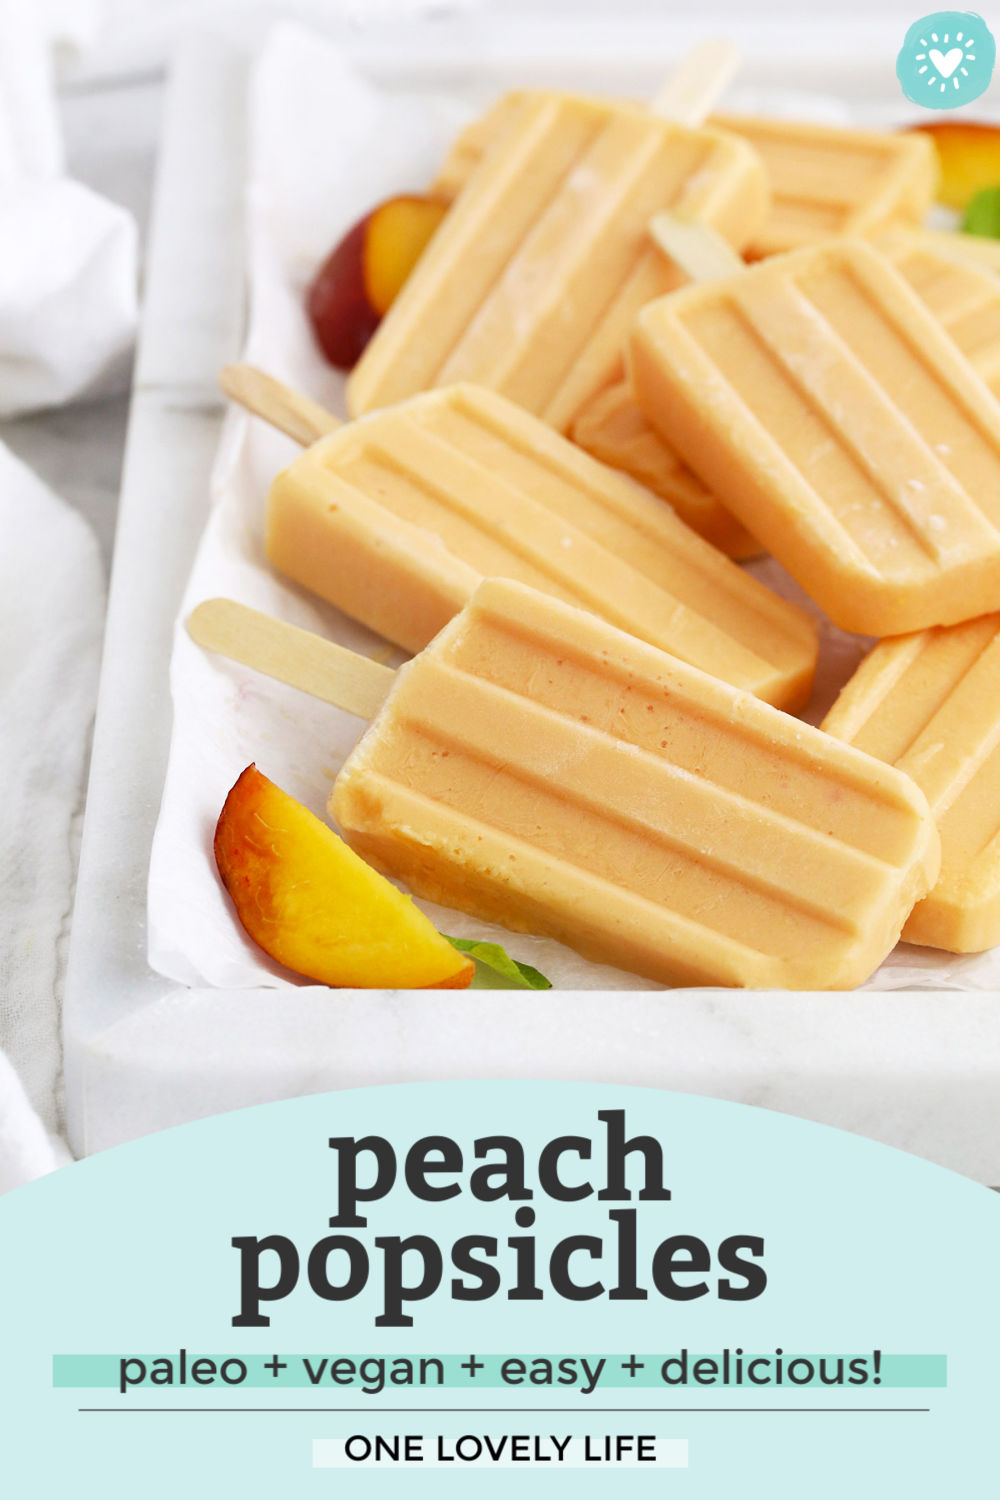 Front view of peach popsicles on a marble serving platter with peach slices and mint leaves with text overly that reads "peach popsicles. paleo + vegan + easy + delicious! One Lovely Life"